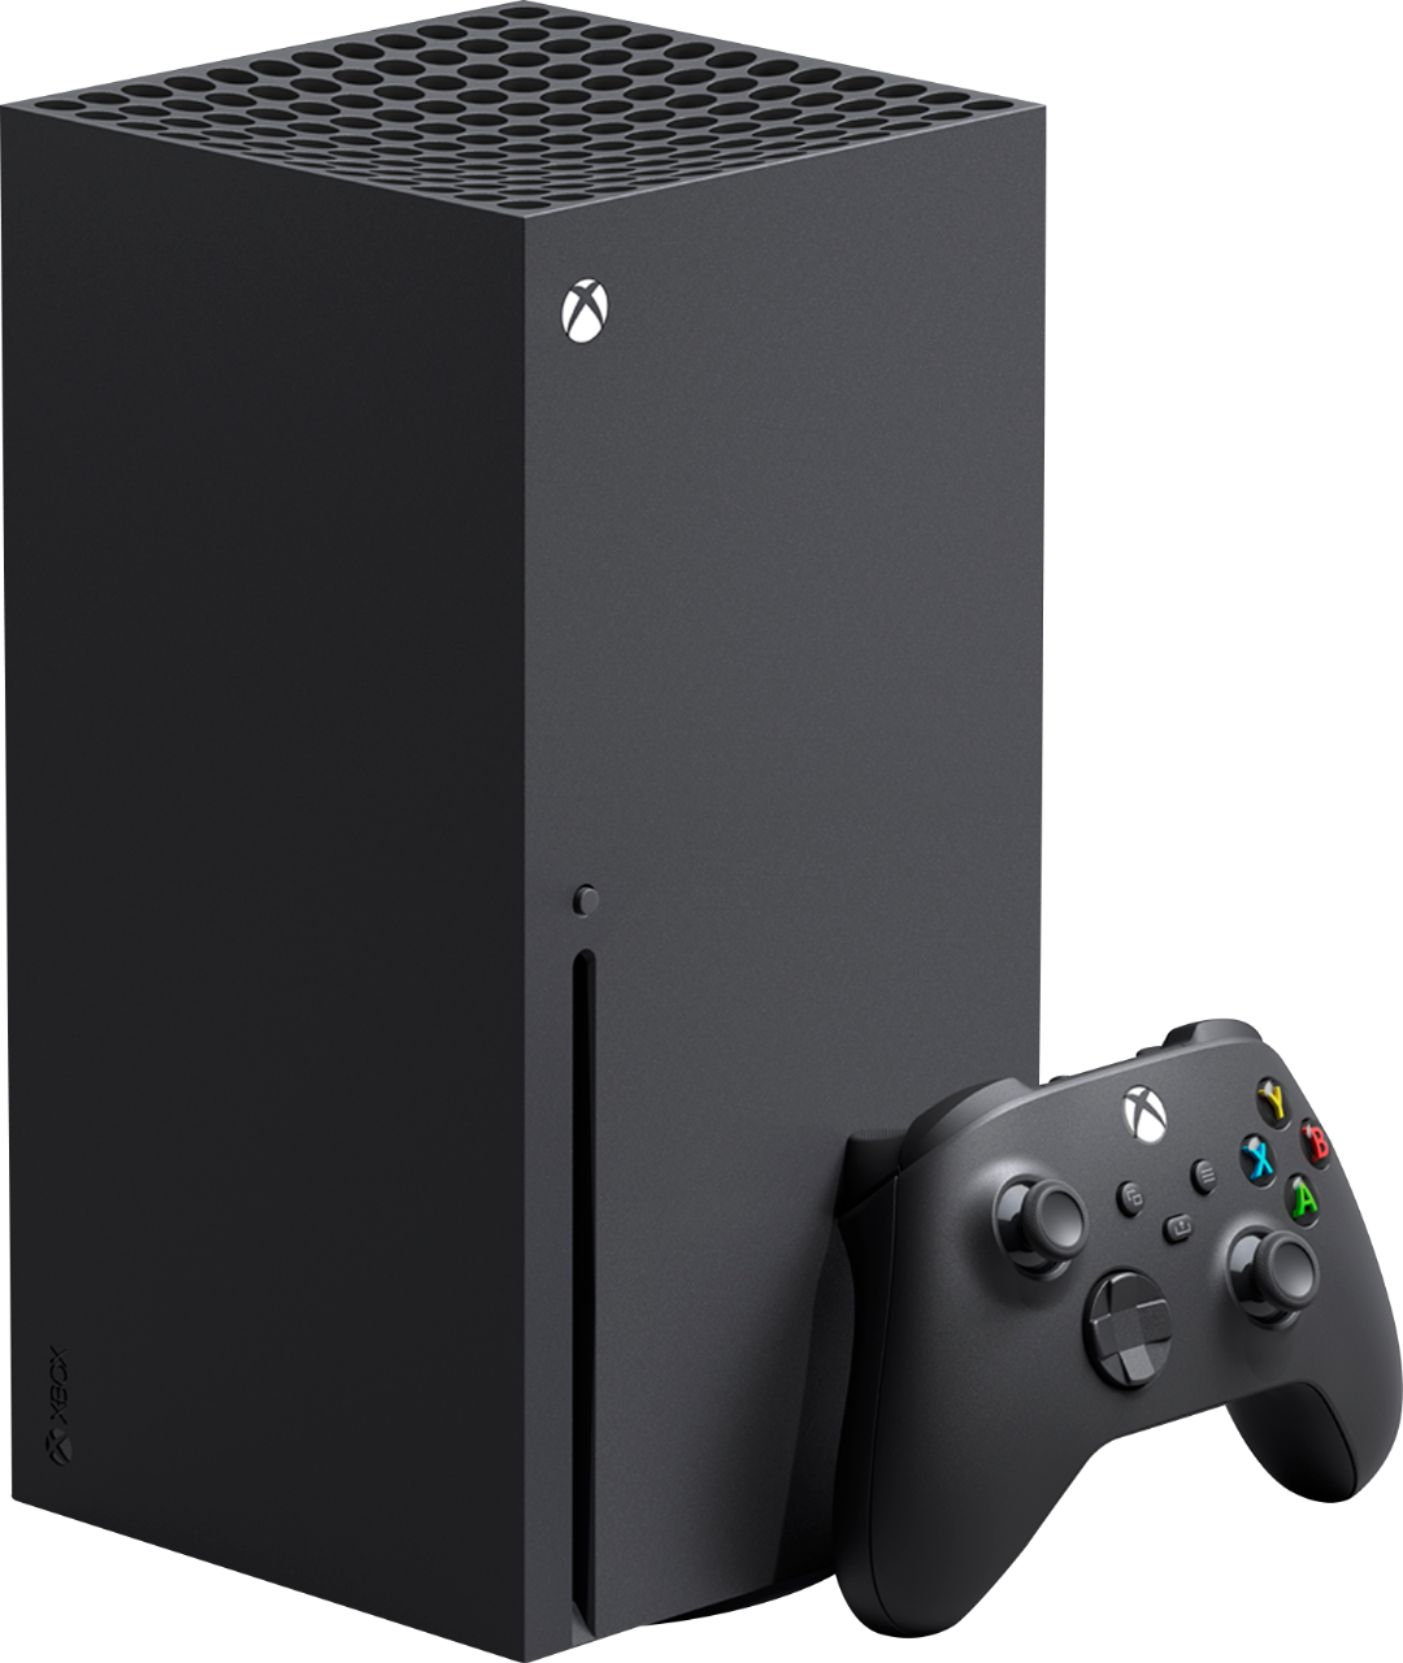 Microsoft Xbox Series X 1TB Console with Extra Wireless Controller - Black - image 4 of 4